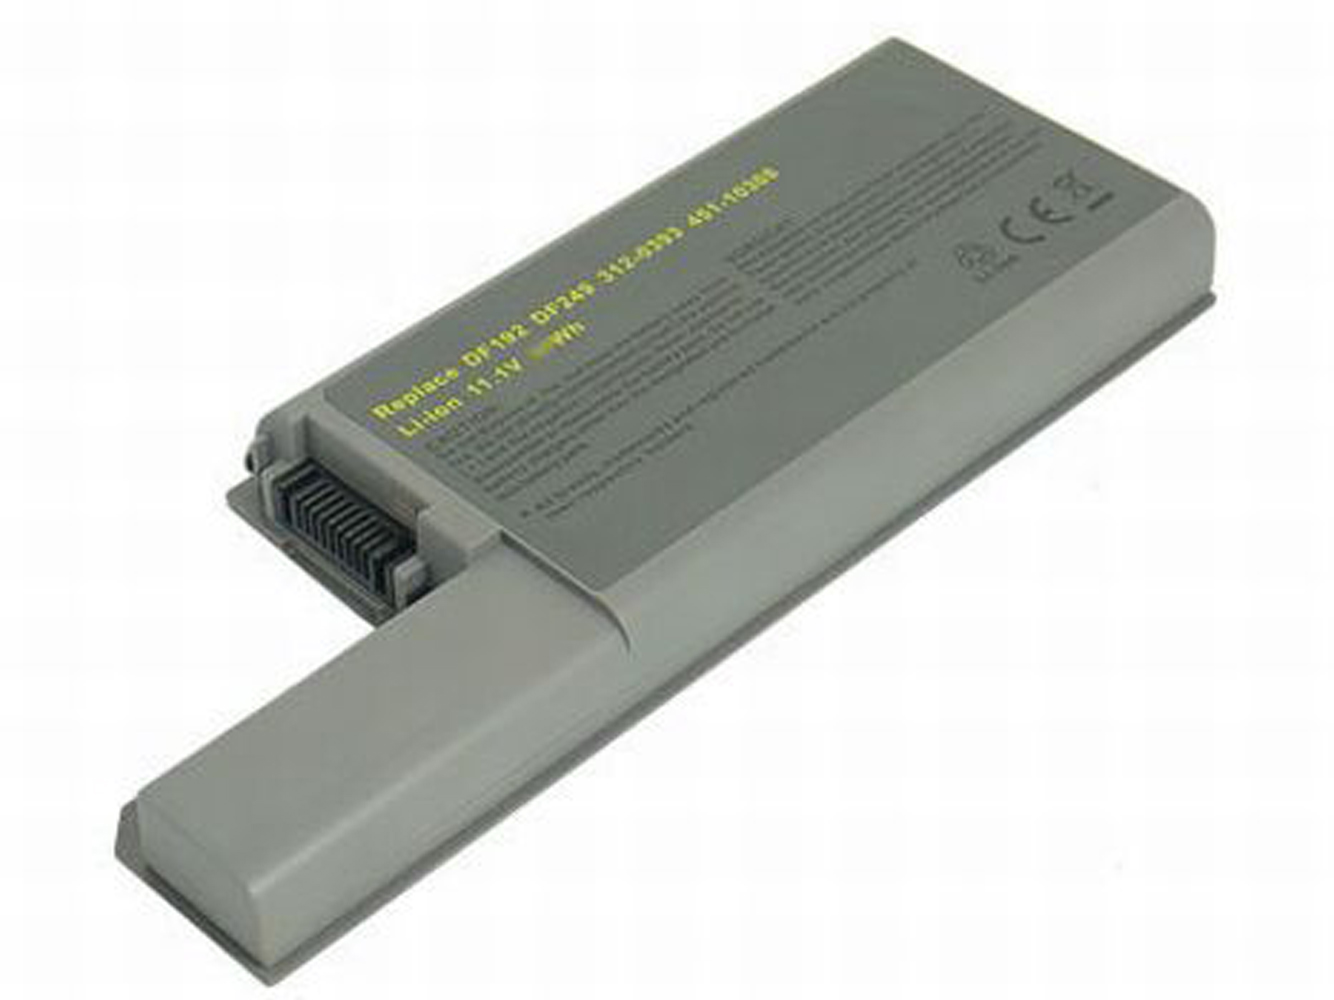 Replacement for Dell Latitude D531, Latitude D531N, Latitude D820, Latitude D830, Precision M65, Precision M4300 Mobile Workstation Laptop Battery